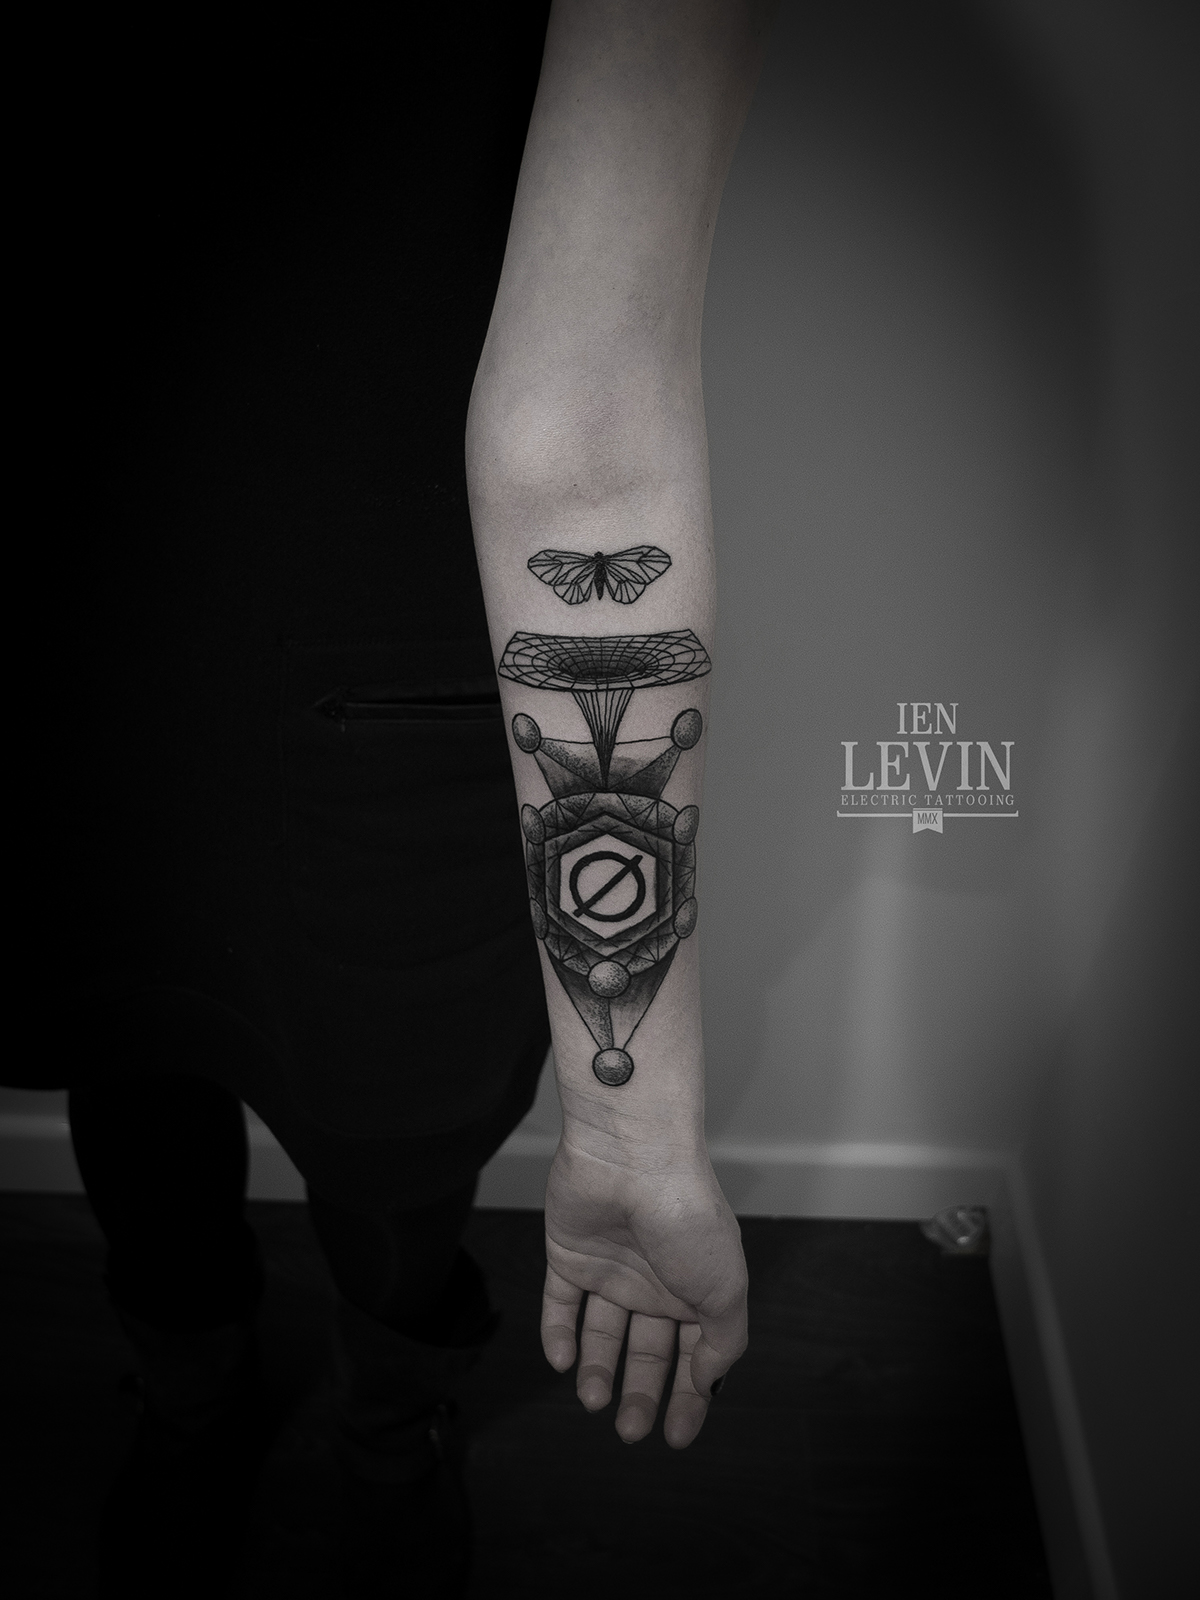 tattoo ienlevin levin lineart dotwork graphic etching engraving blackwork masonic occult symbolism sacred geometry satanic science